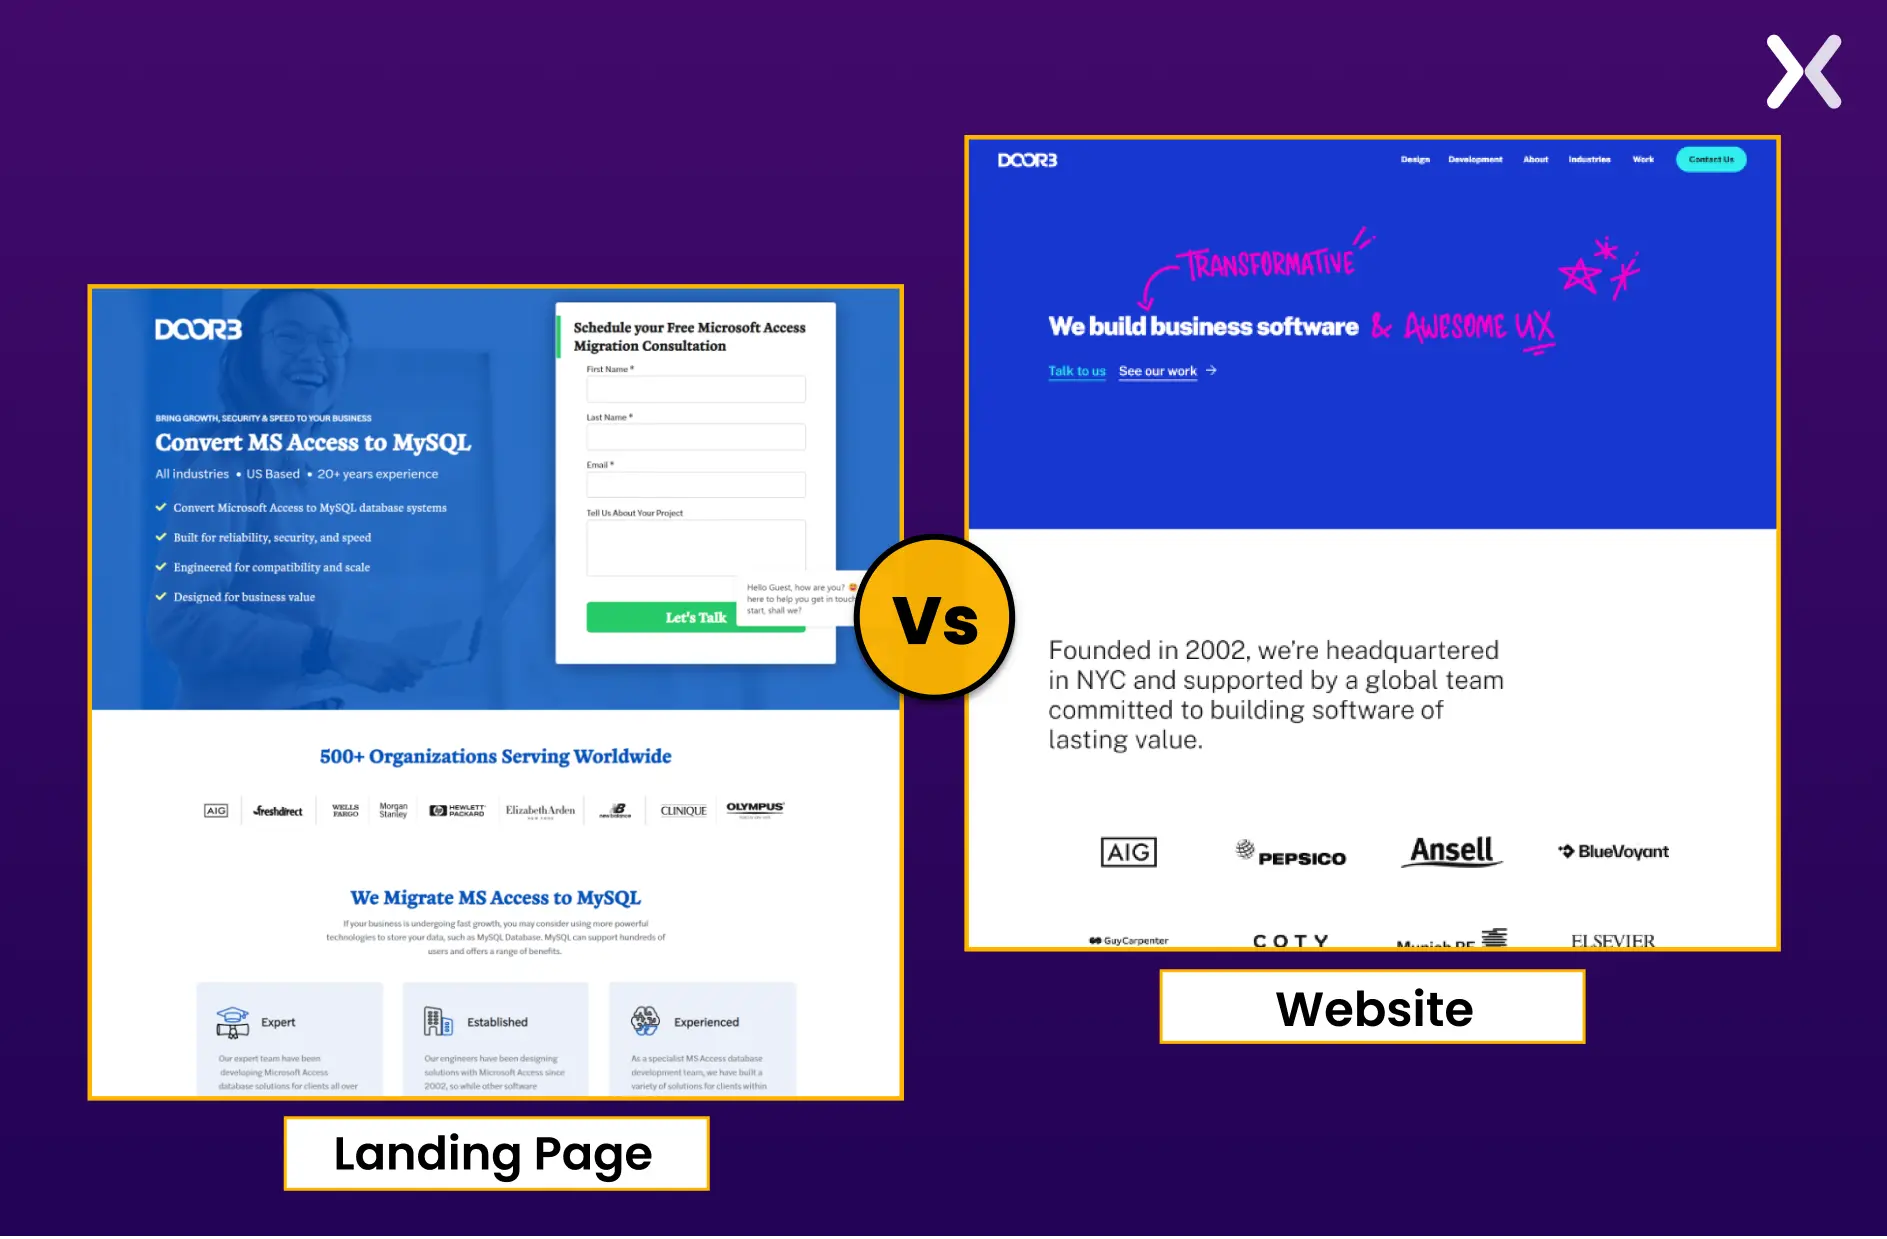 landing-page-and-website-differences.webp